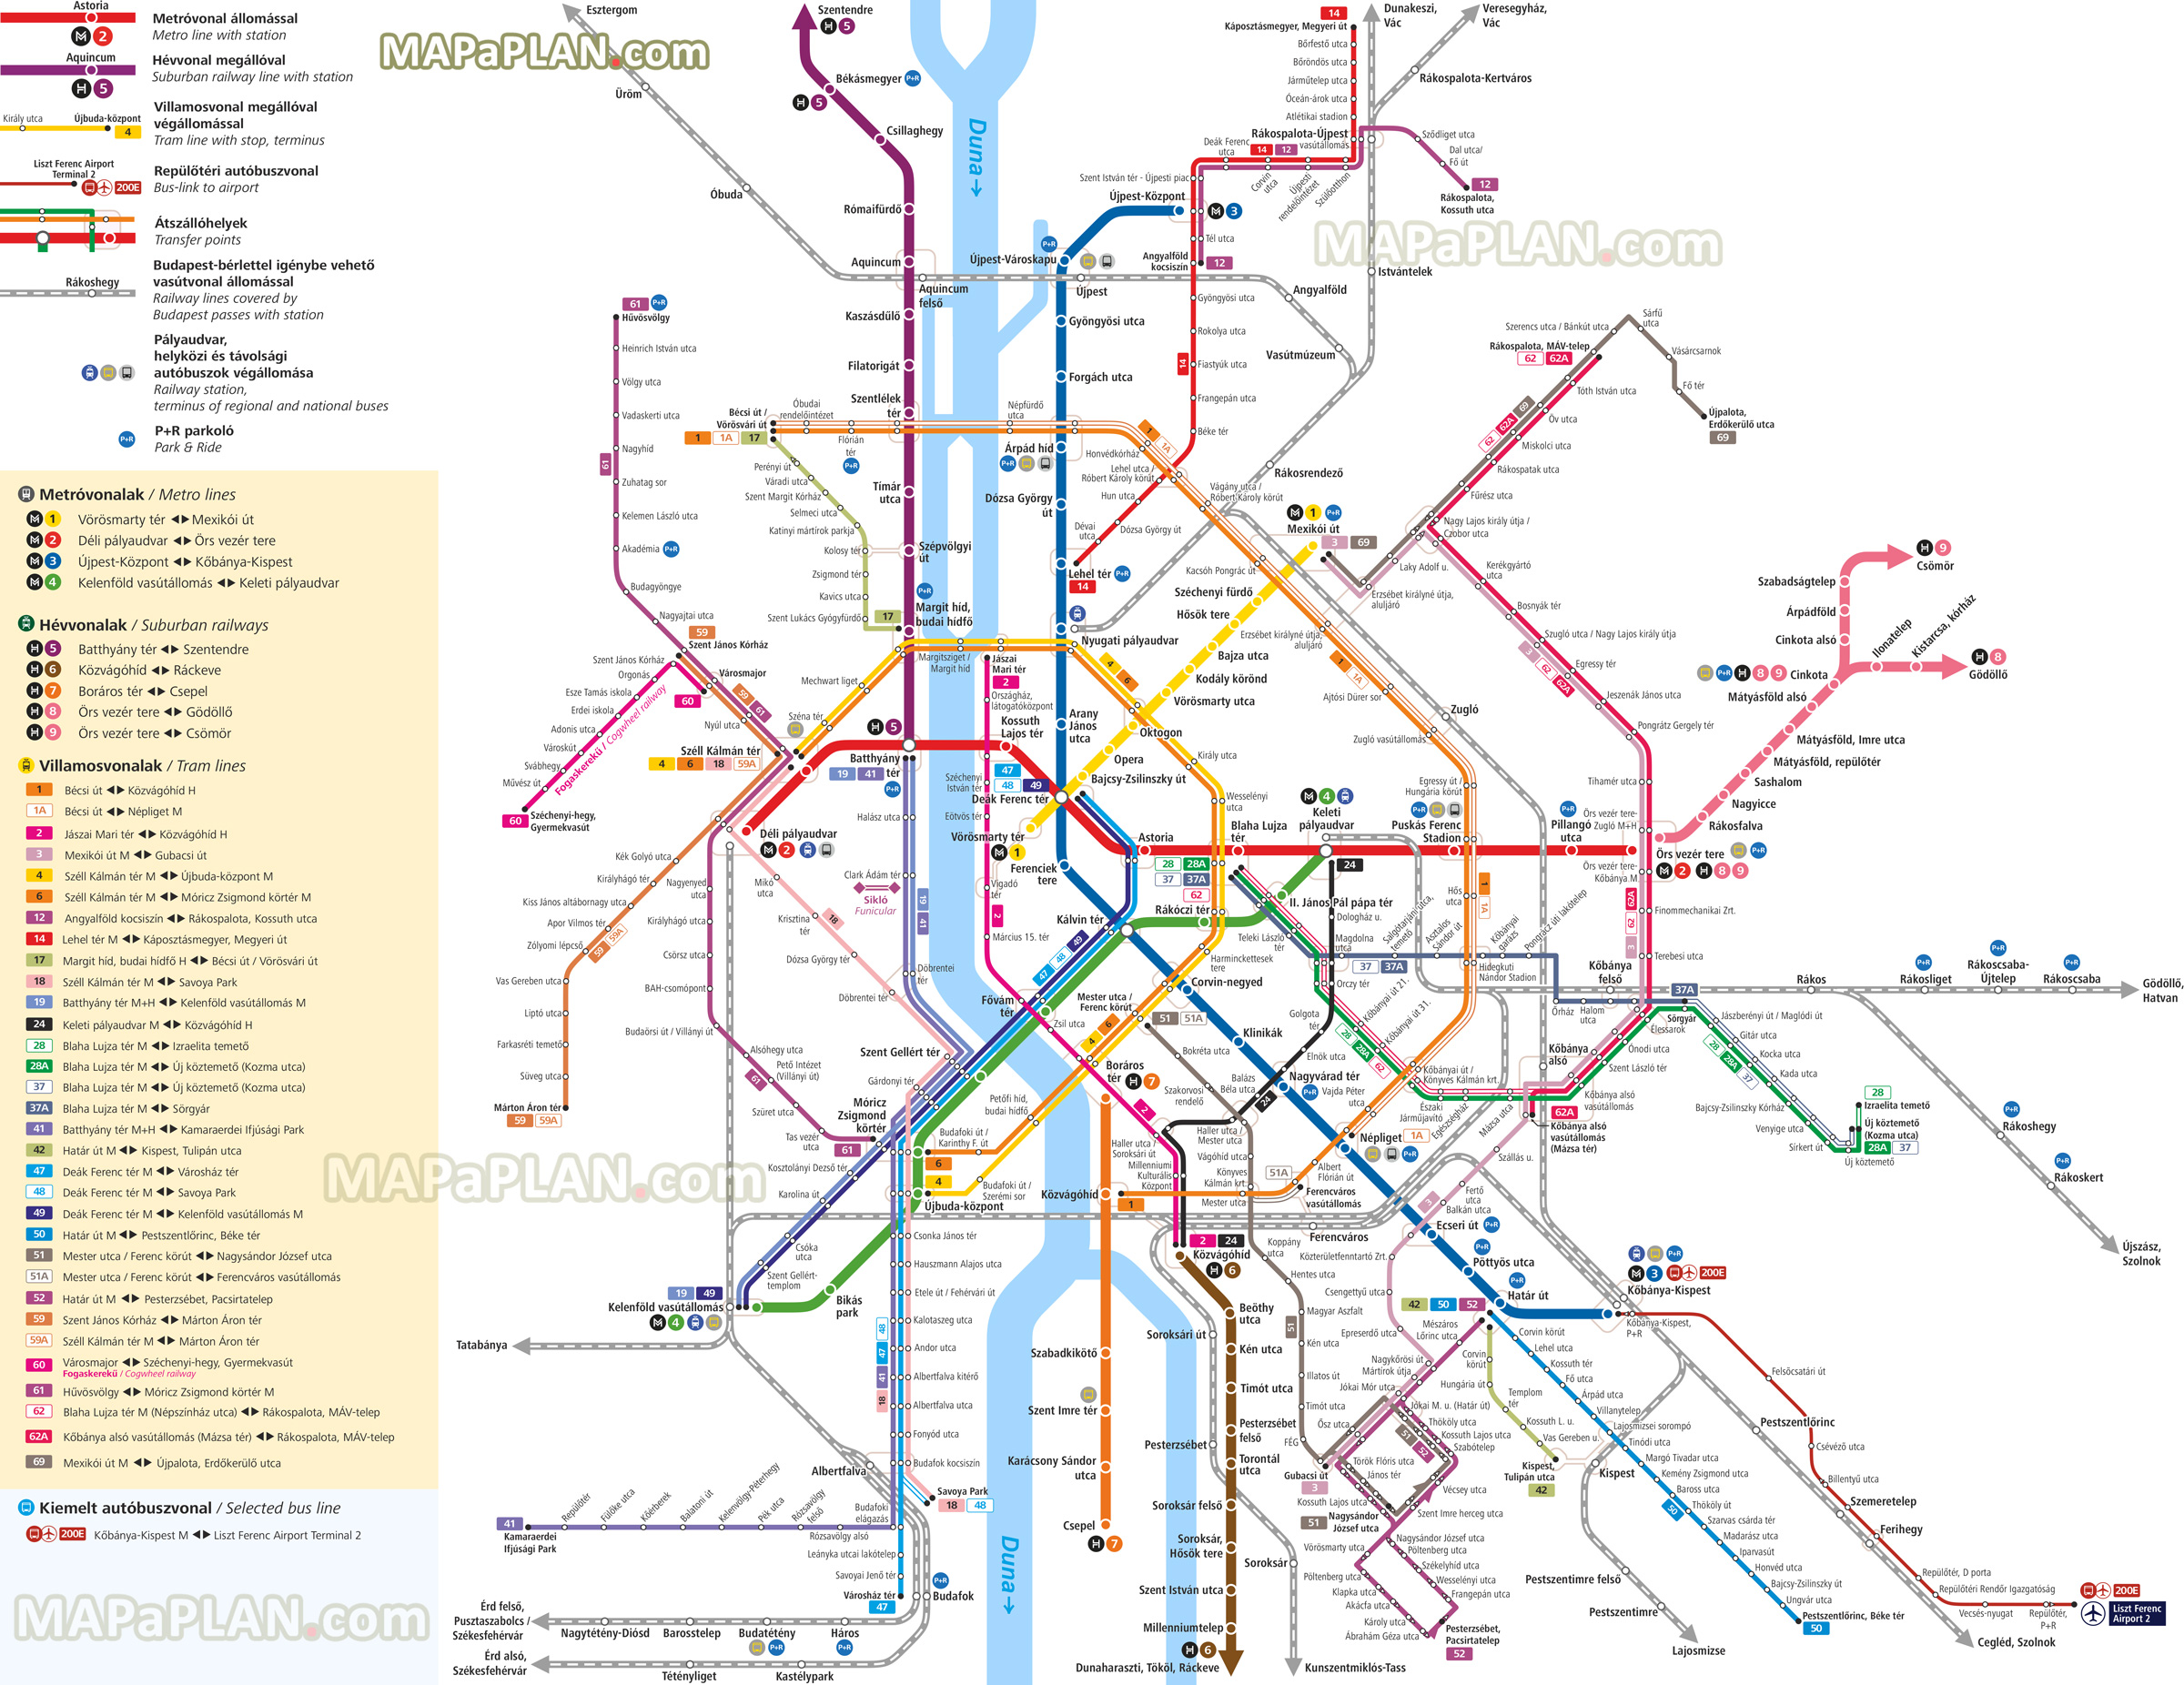 metro subway underground tube tram tramway station suburban hev railway line bkk public transport system network airport terminal link Budapest top tourist attractions map